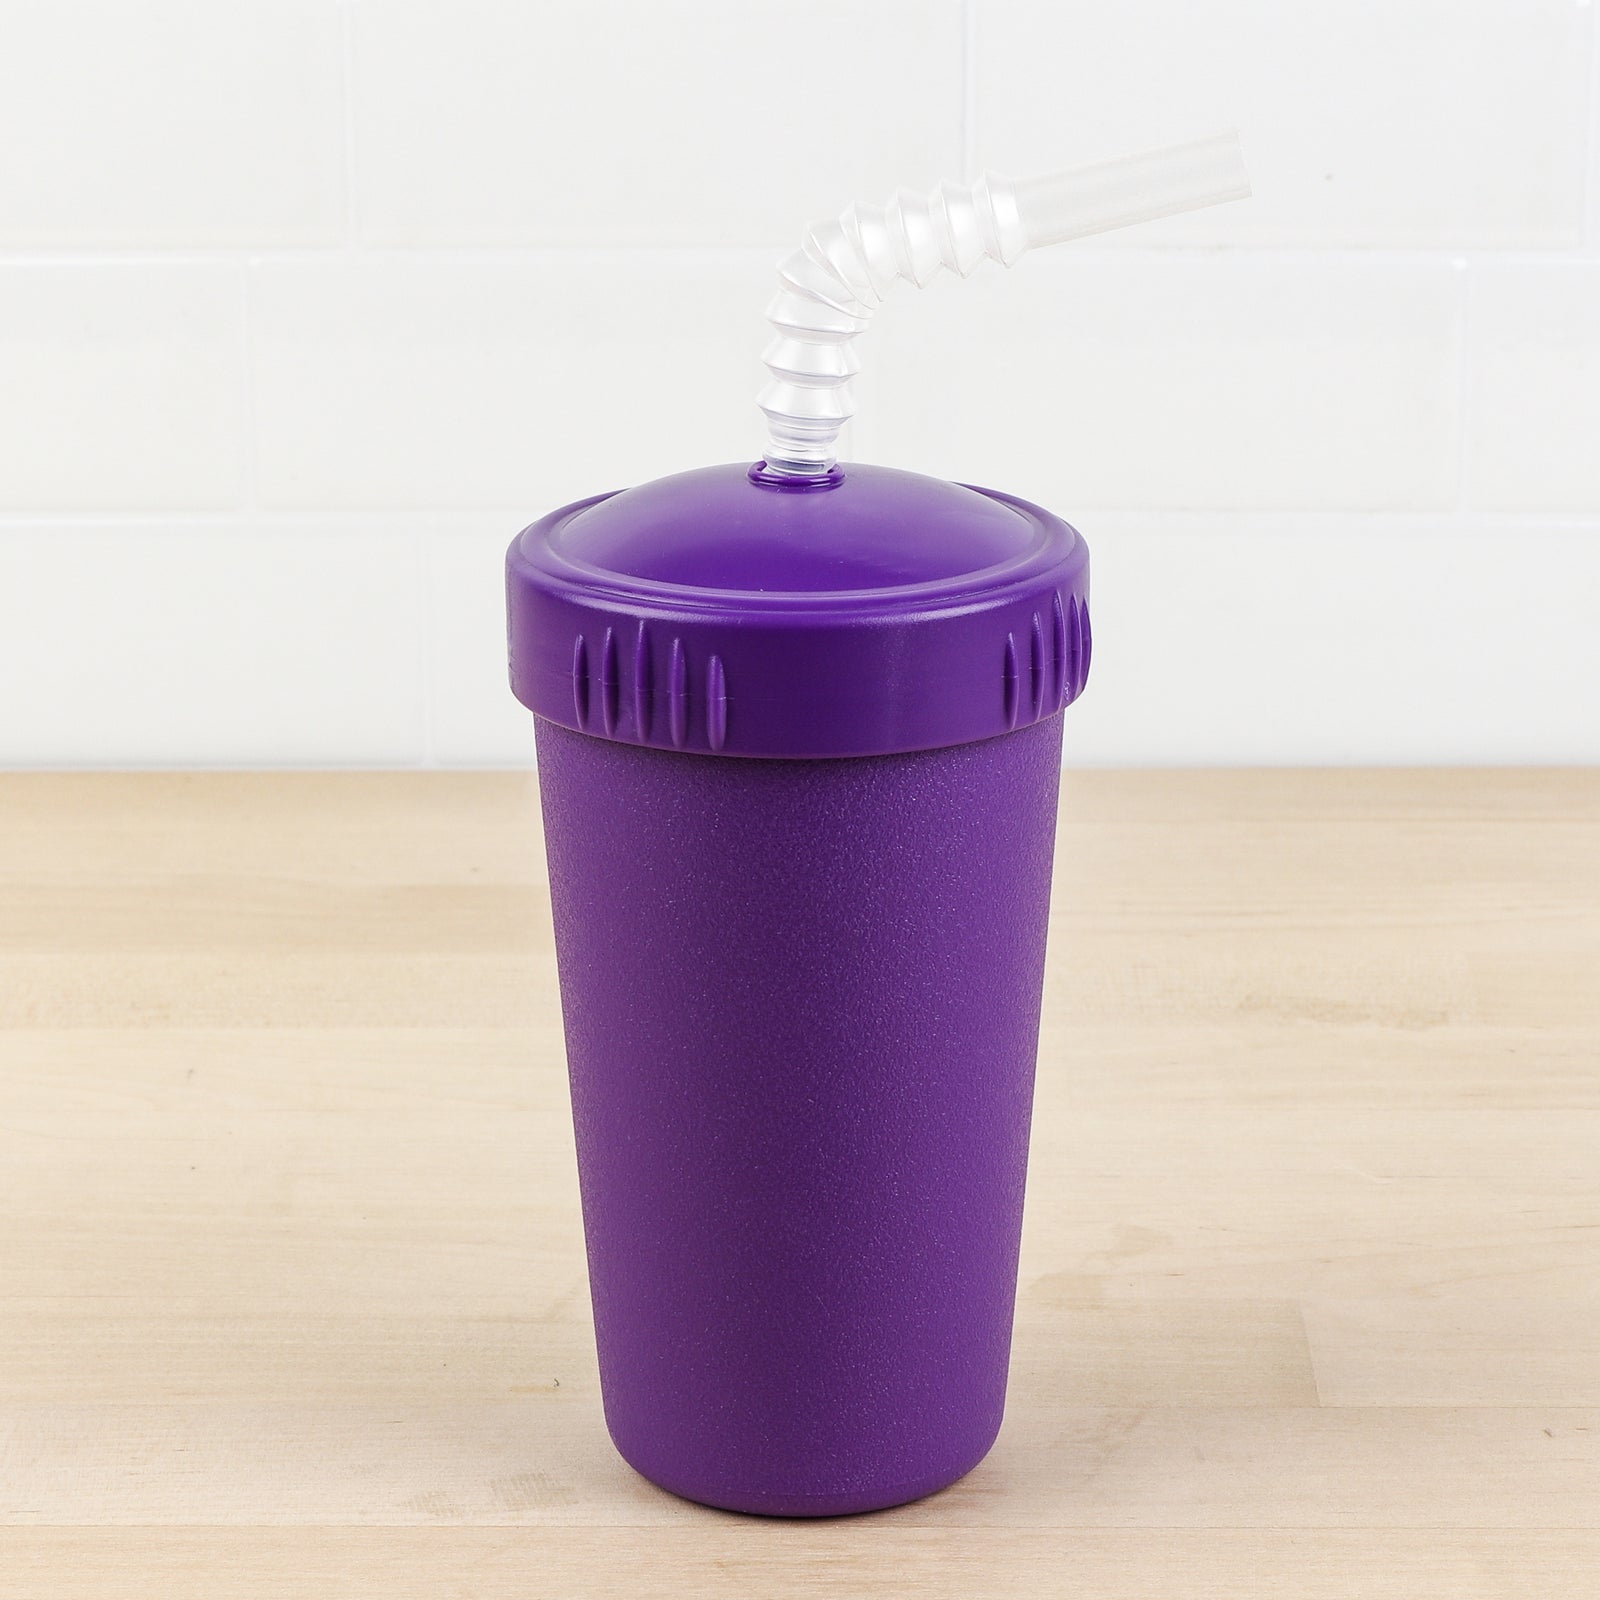 Re-play Straw Cup w/ Reversible Straw-The Living Co.